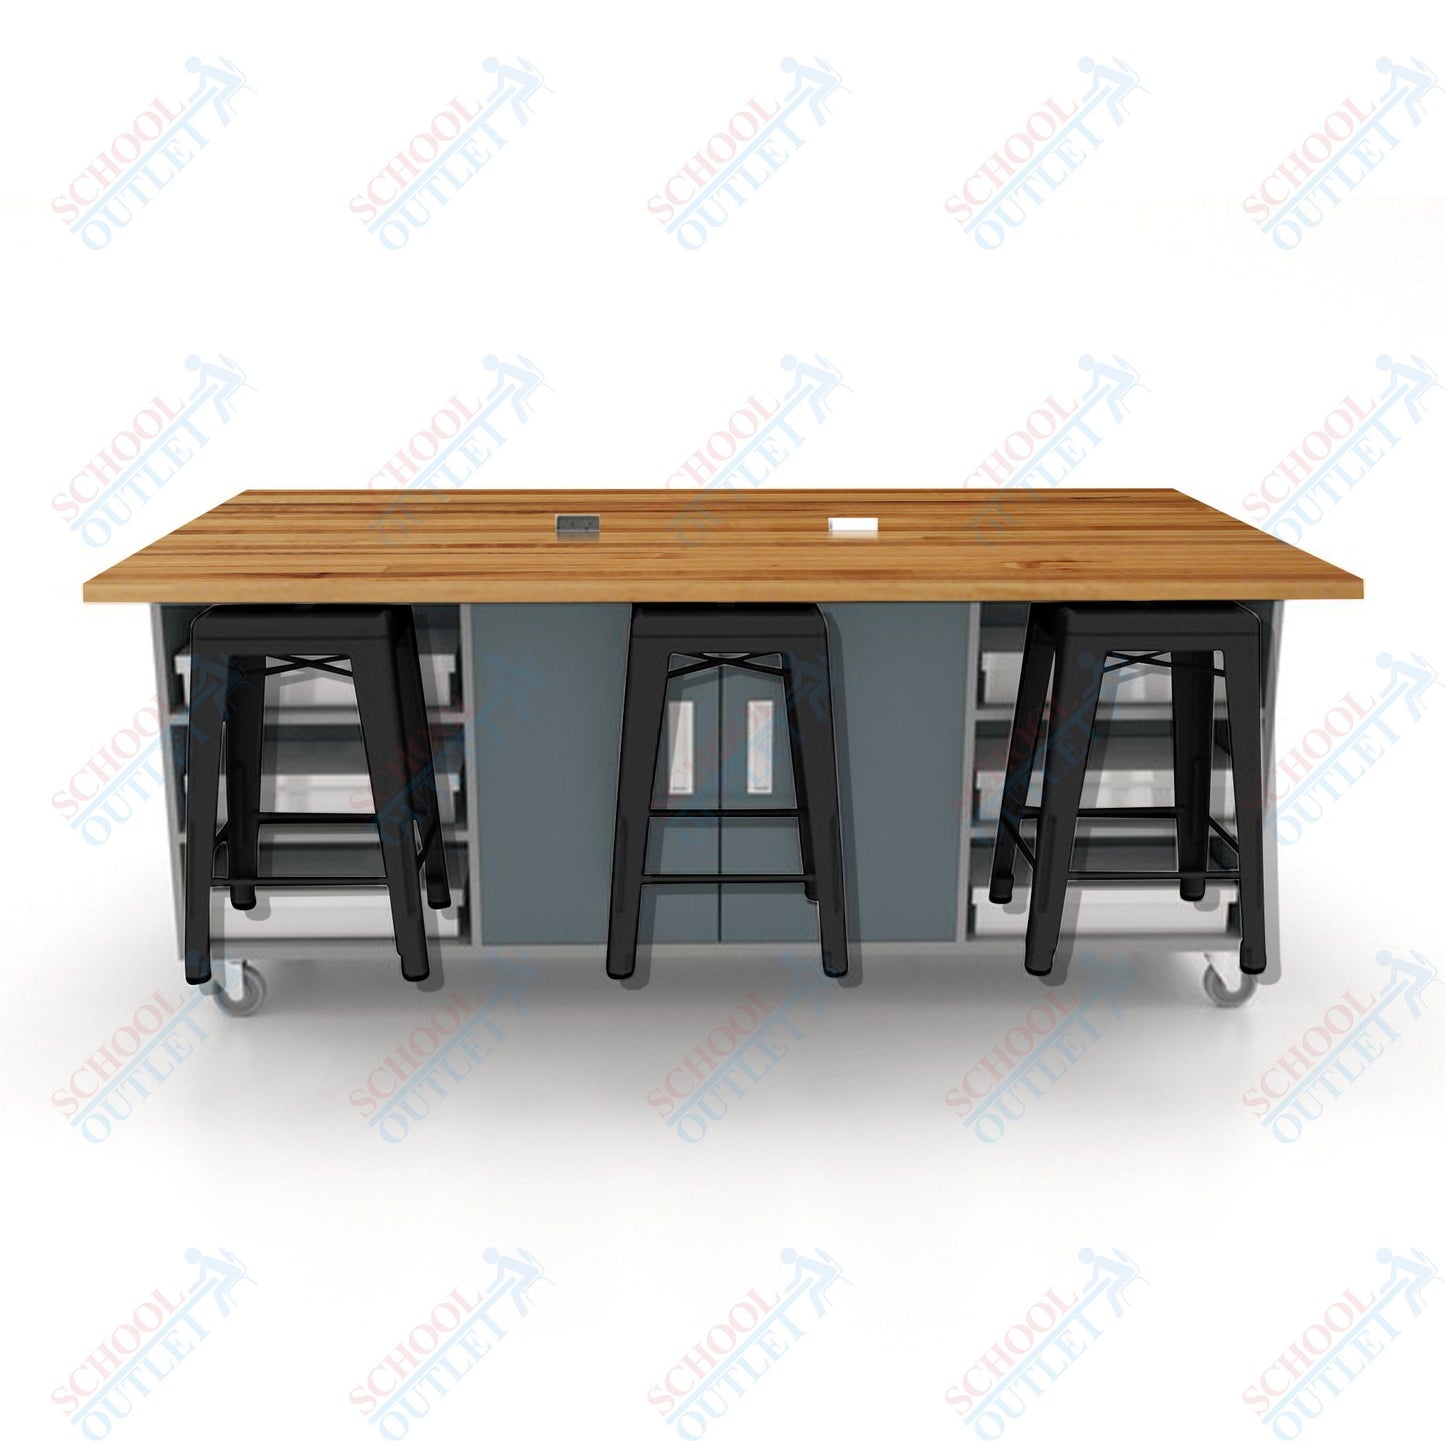 CEF ED Double Table 36"H Butcher Block Top, Laminate Base with  6 Stools, Storage bins, and Electrical Outlets Included.